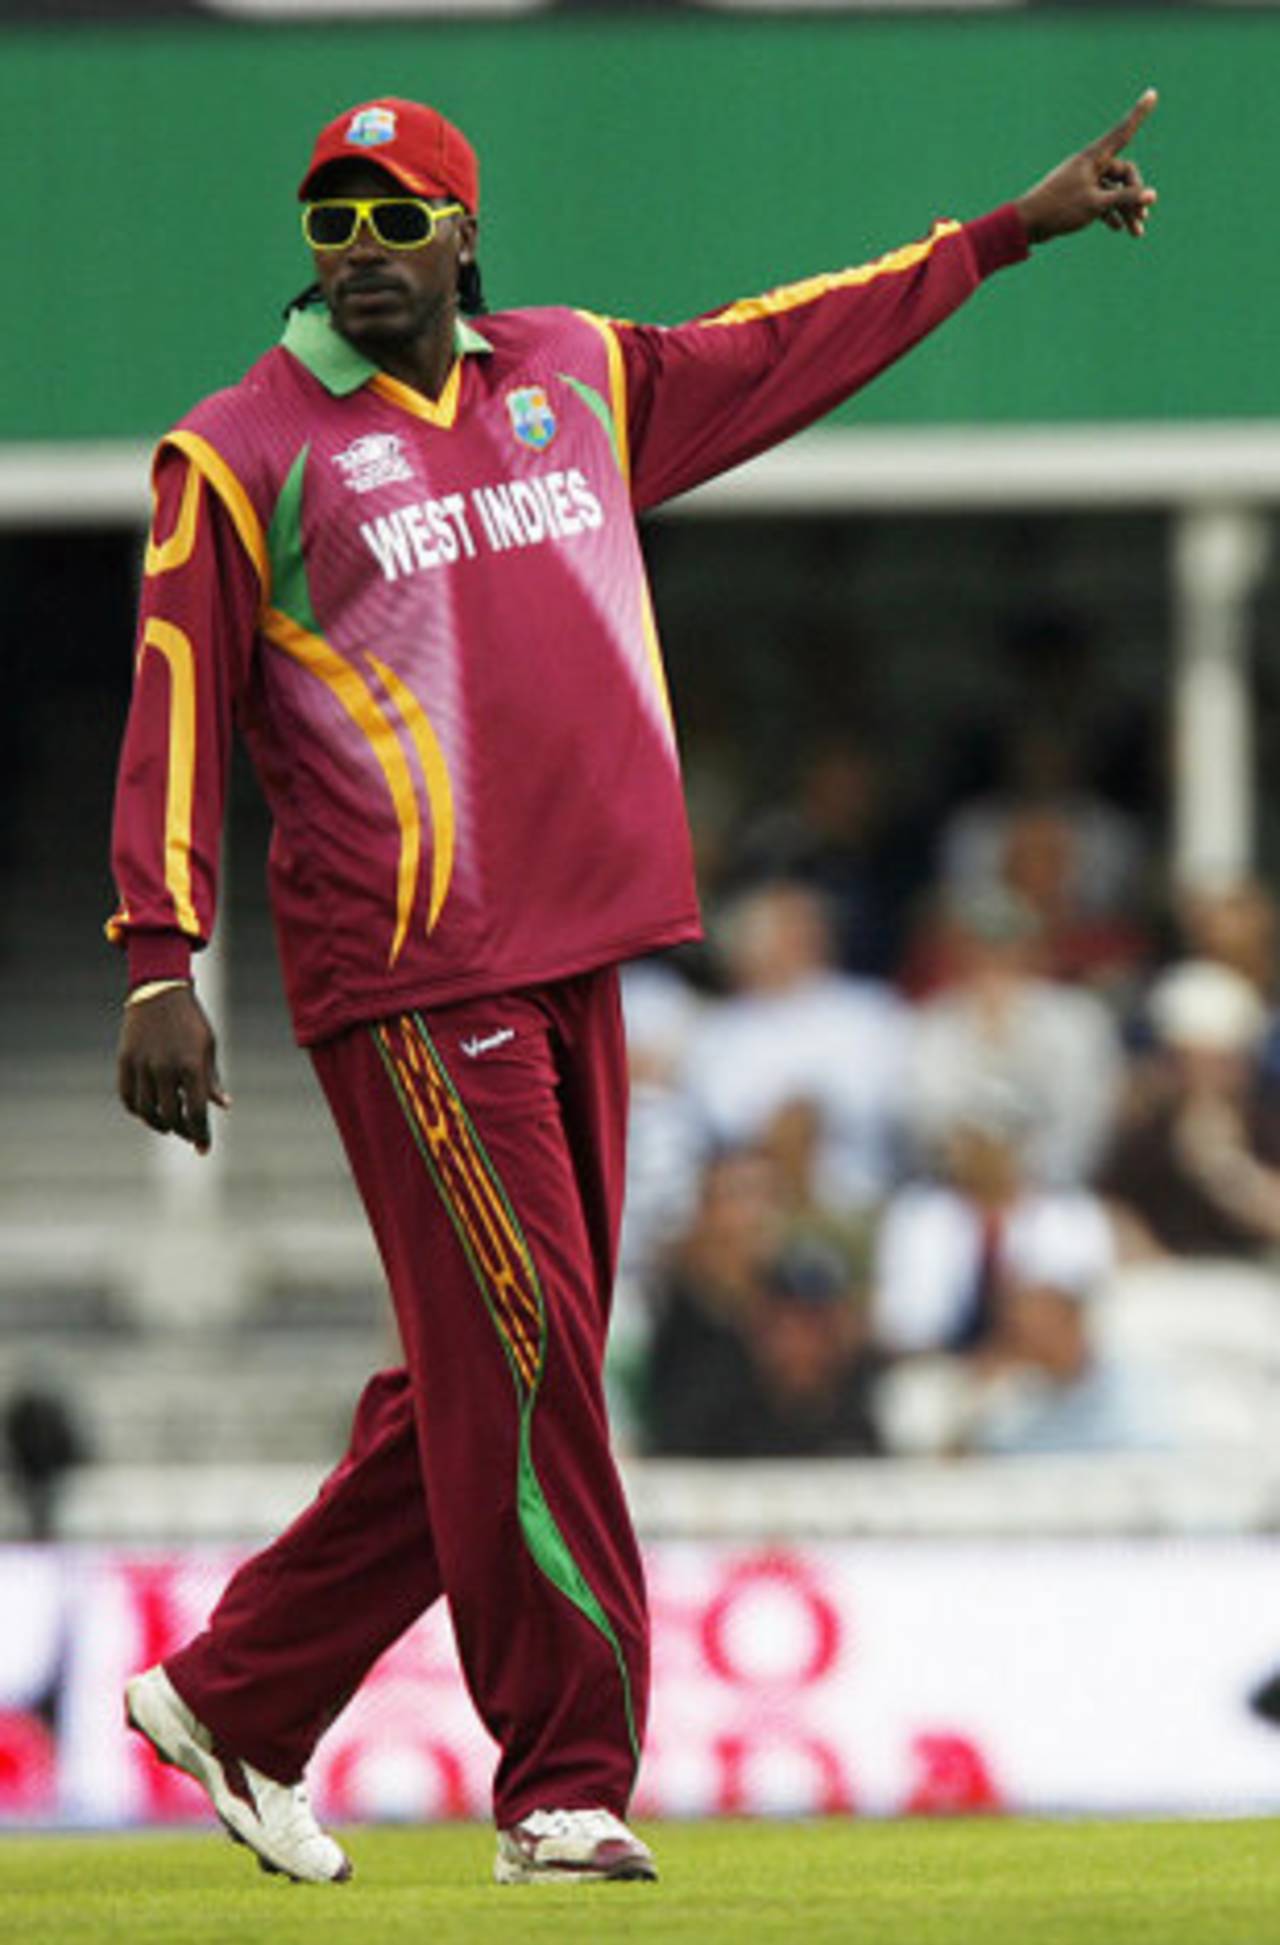 Not much went right for West Indies and Chris Gayle while fielding, South Africa v West Indies, ICC World Twenty20 Super Eights, The Oval, June 13, 2009 